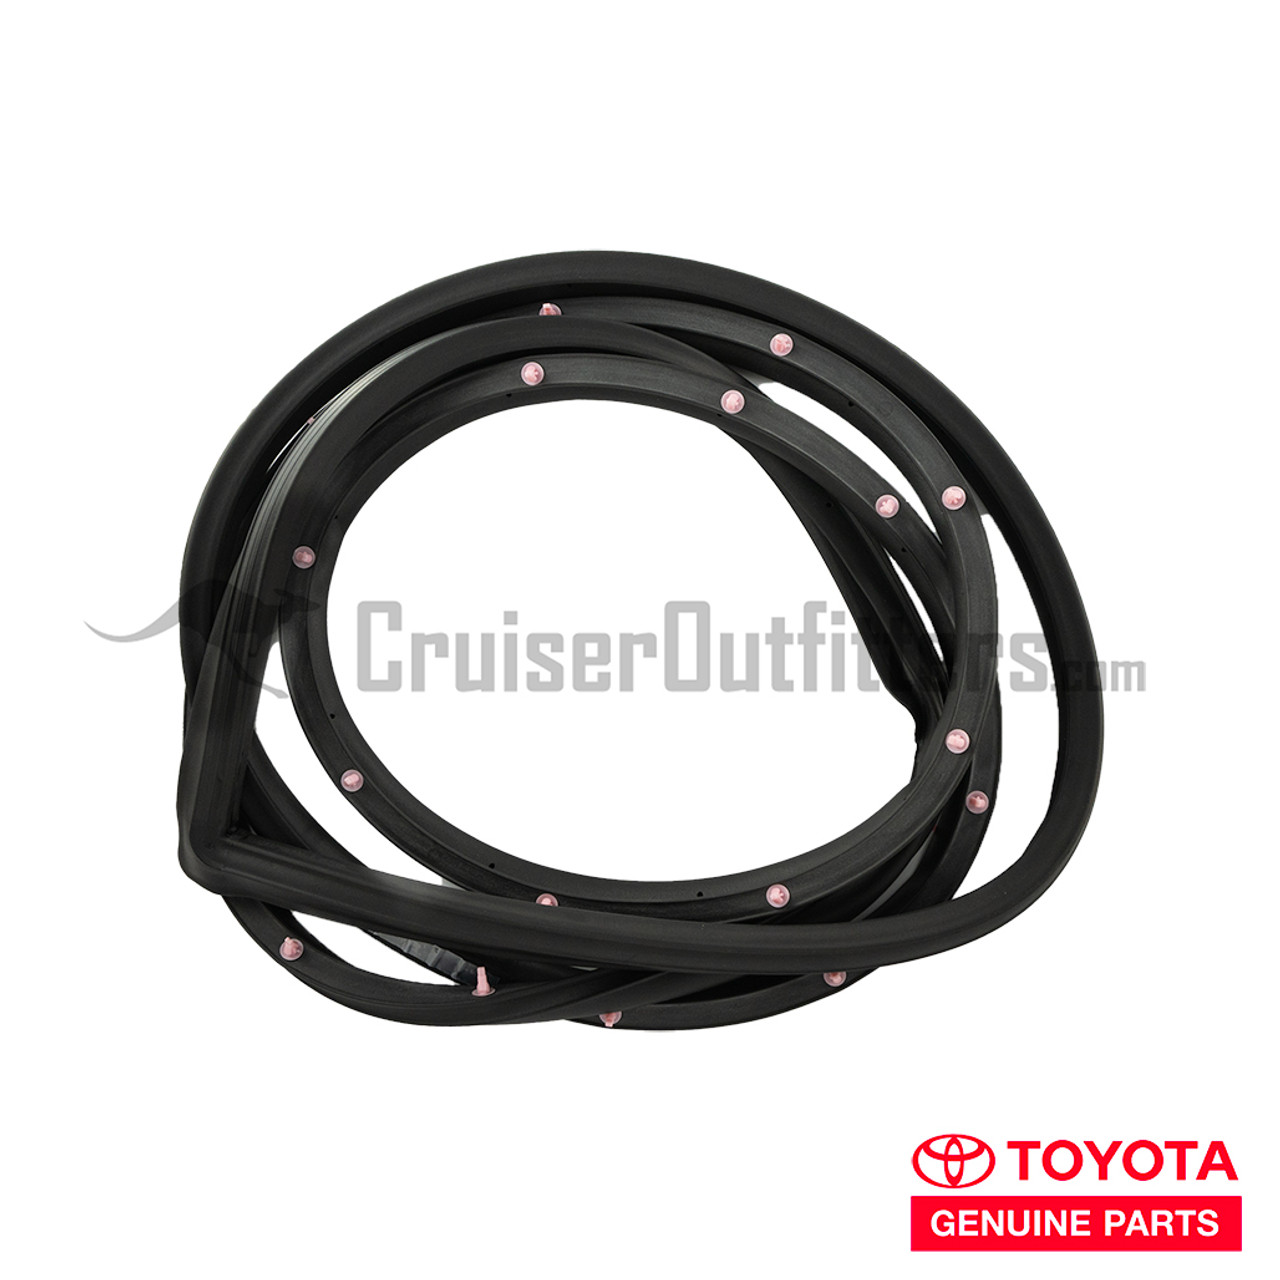 Fixed Cab Front Door Left Hand Weatherstrip - OEM Toyota - Fits 7x Series - (Check Vin) (WS60050L)